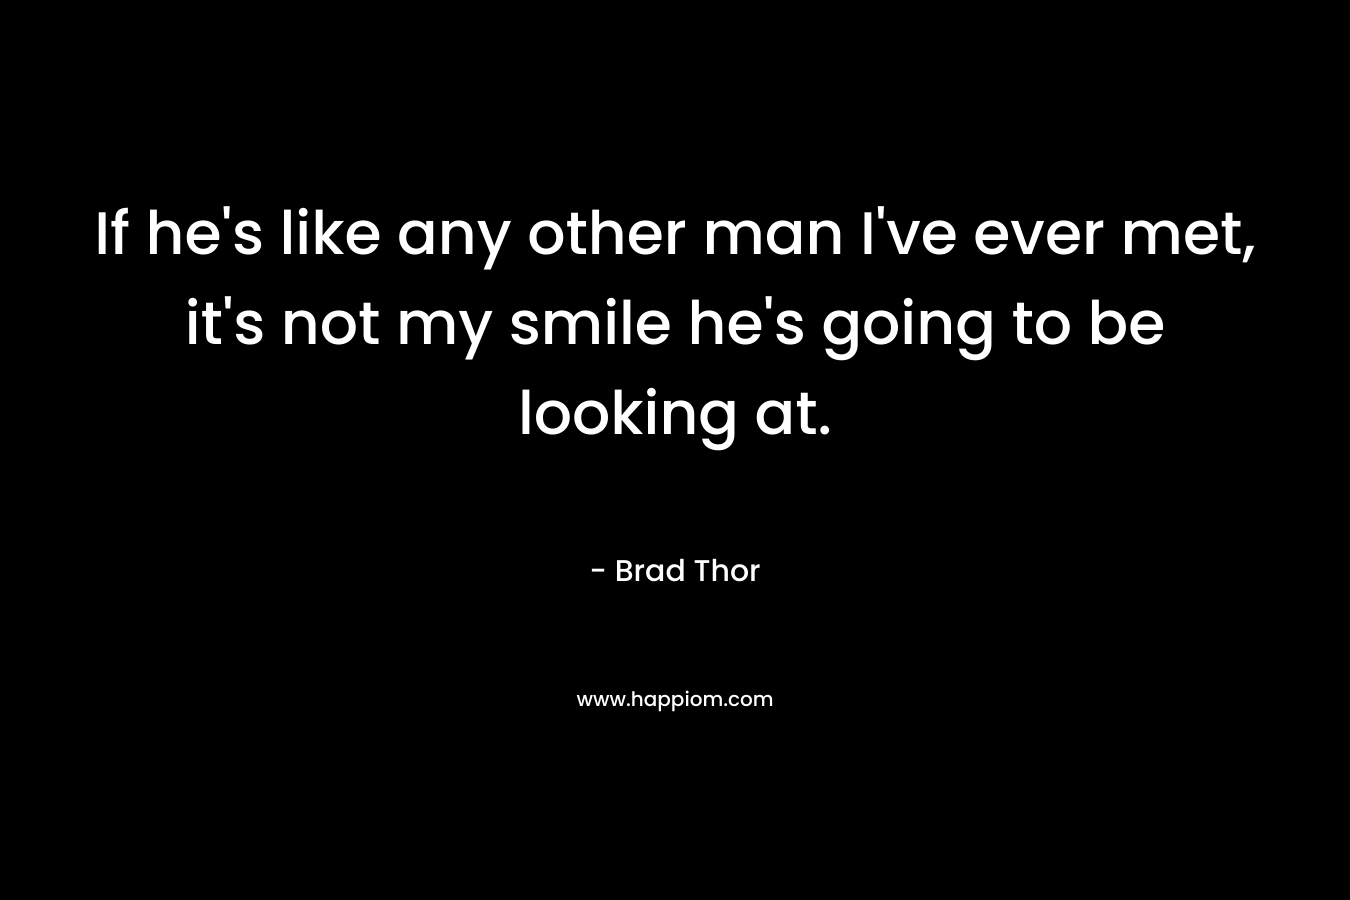 If he’s like any other man I’ve ever met, it’s not my smile he’s going to be looking at. – Brad Thor